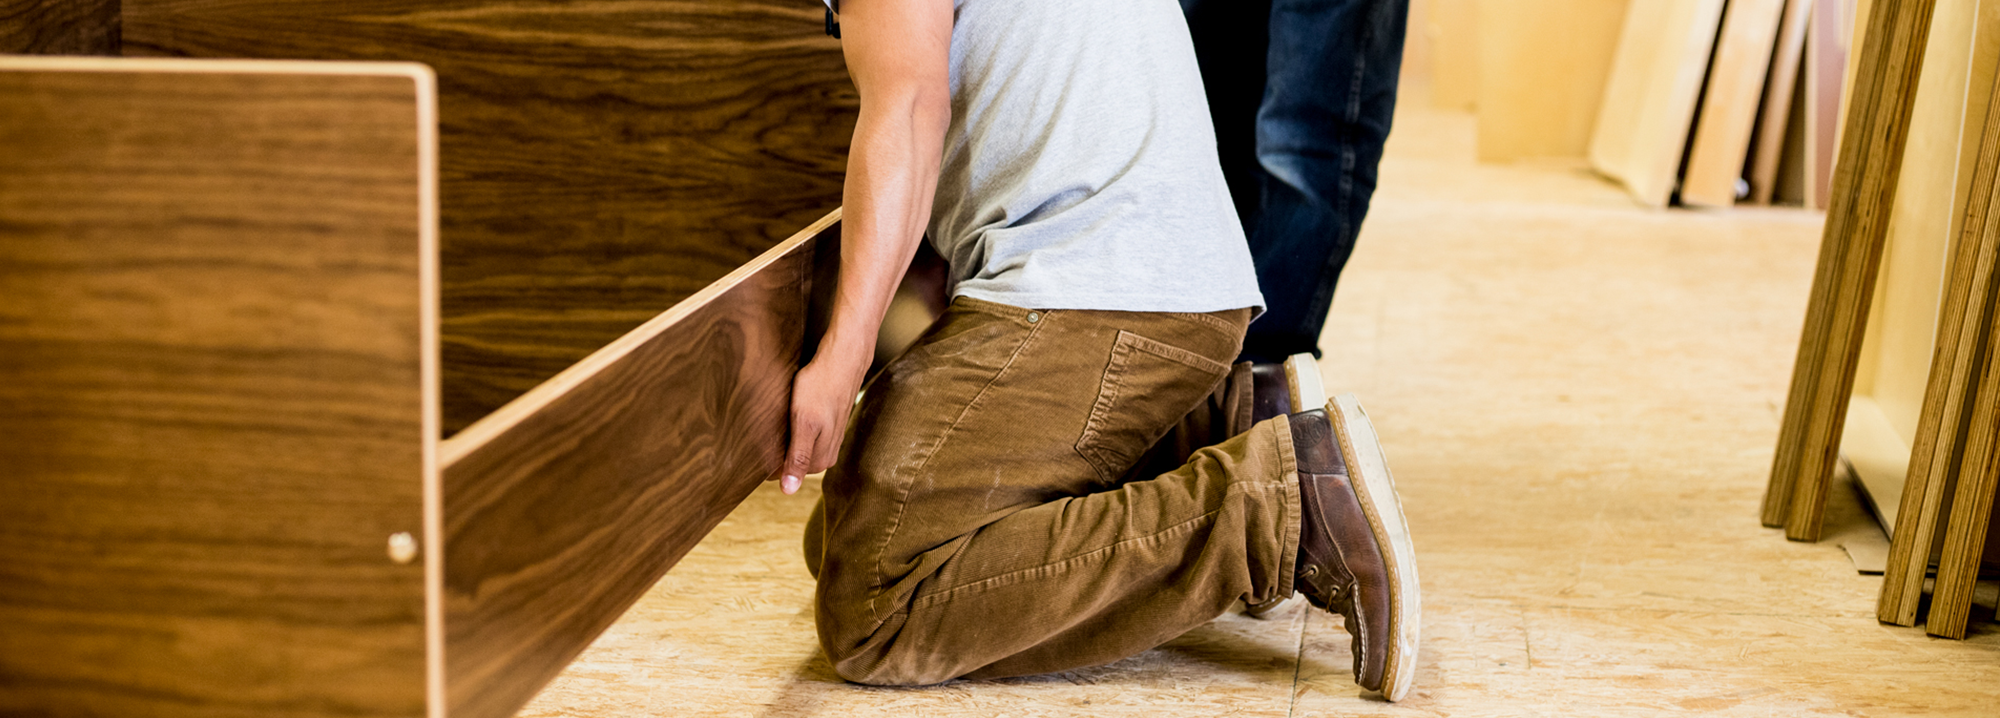 Person kneeling on the floor while assembling a wooden furniture piece in a workshop setting.